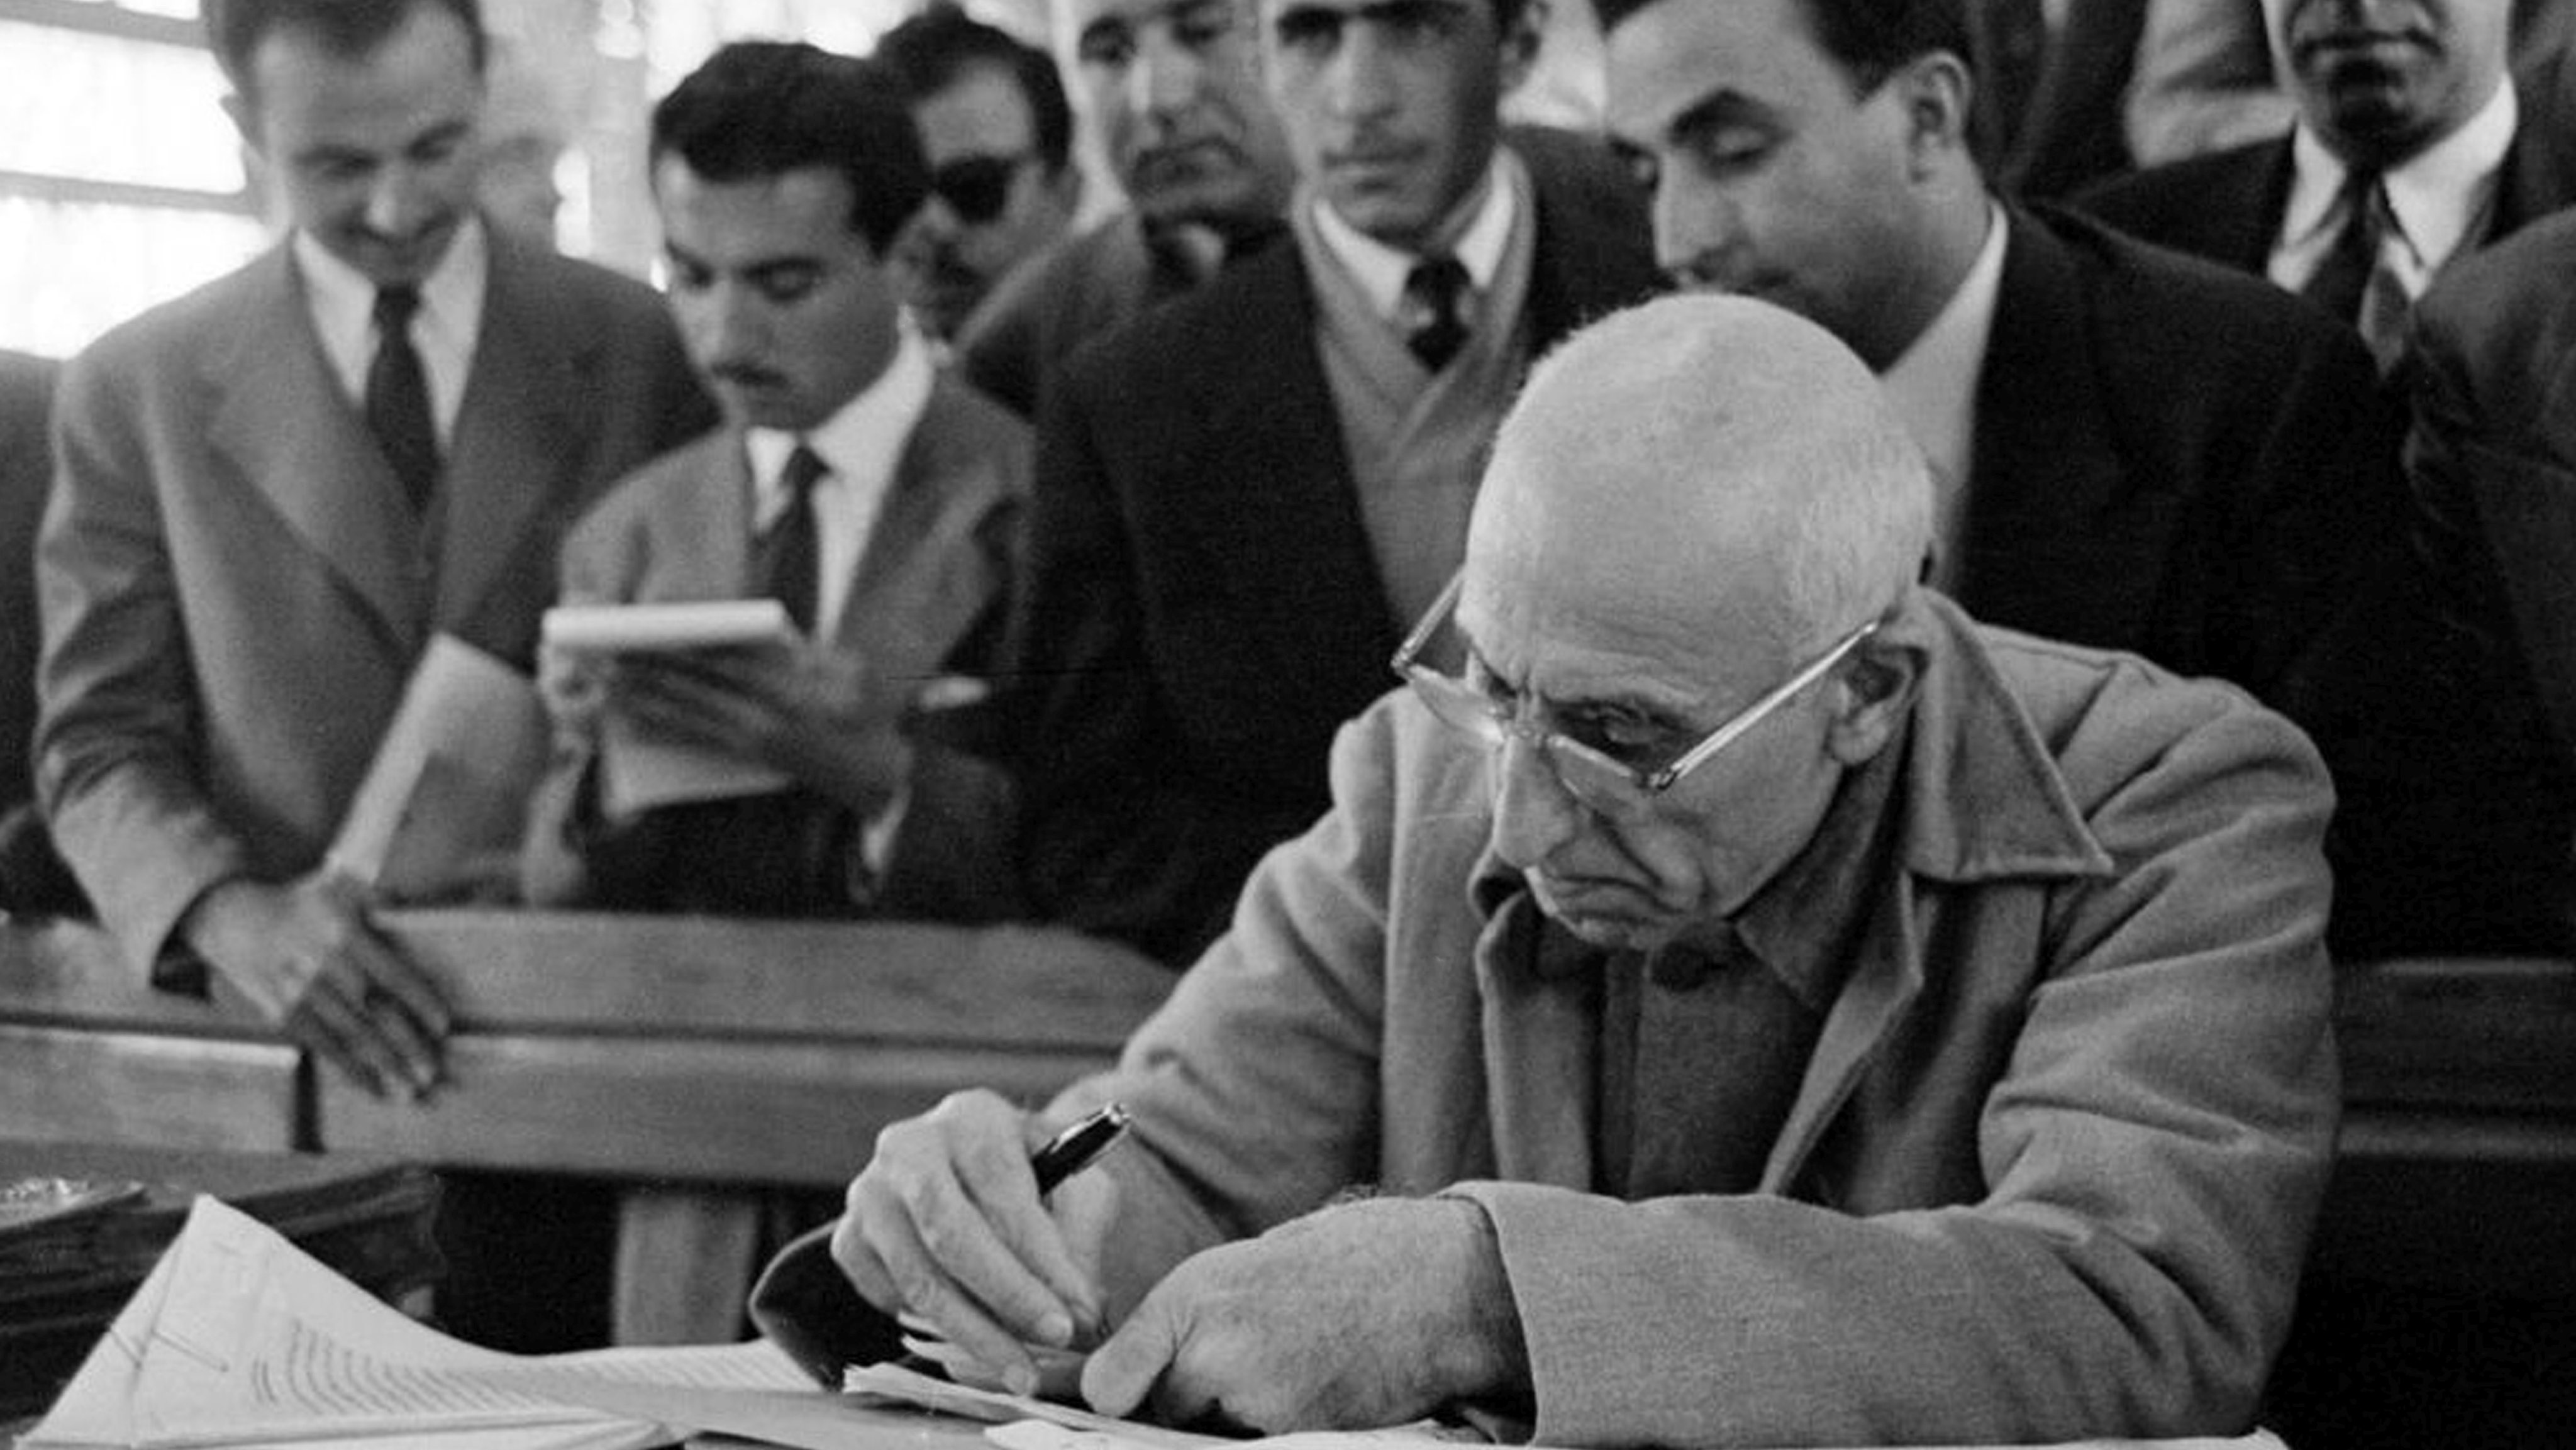 Iran-Persia: Mohammad Mosaddegh or Mosaddeq (Persian: ____ ____), also spelled Mosadeck, or Musaddiq (16 June 1882 Ð 5 March 1967), Prime Minister of Iran from 1951 until being overthrown in a coup d&#039;Žtat in 1953